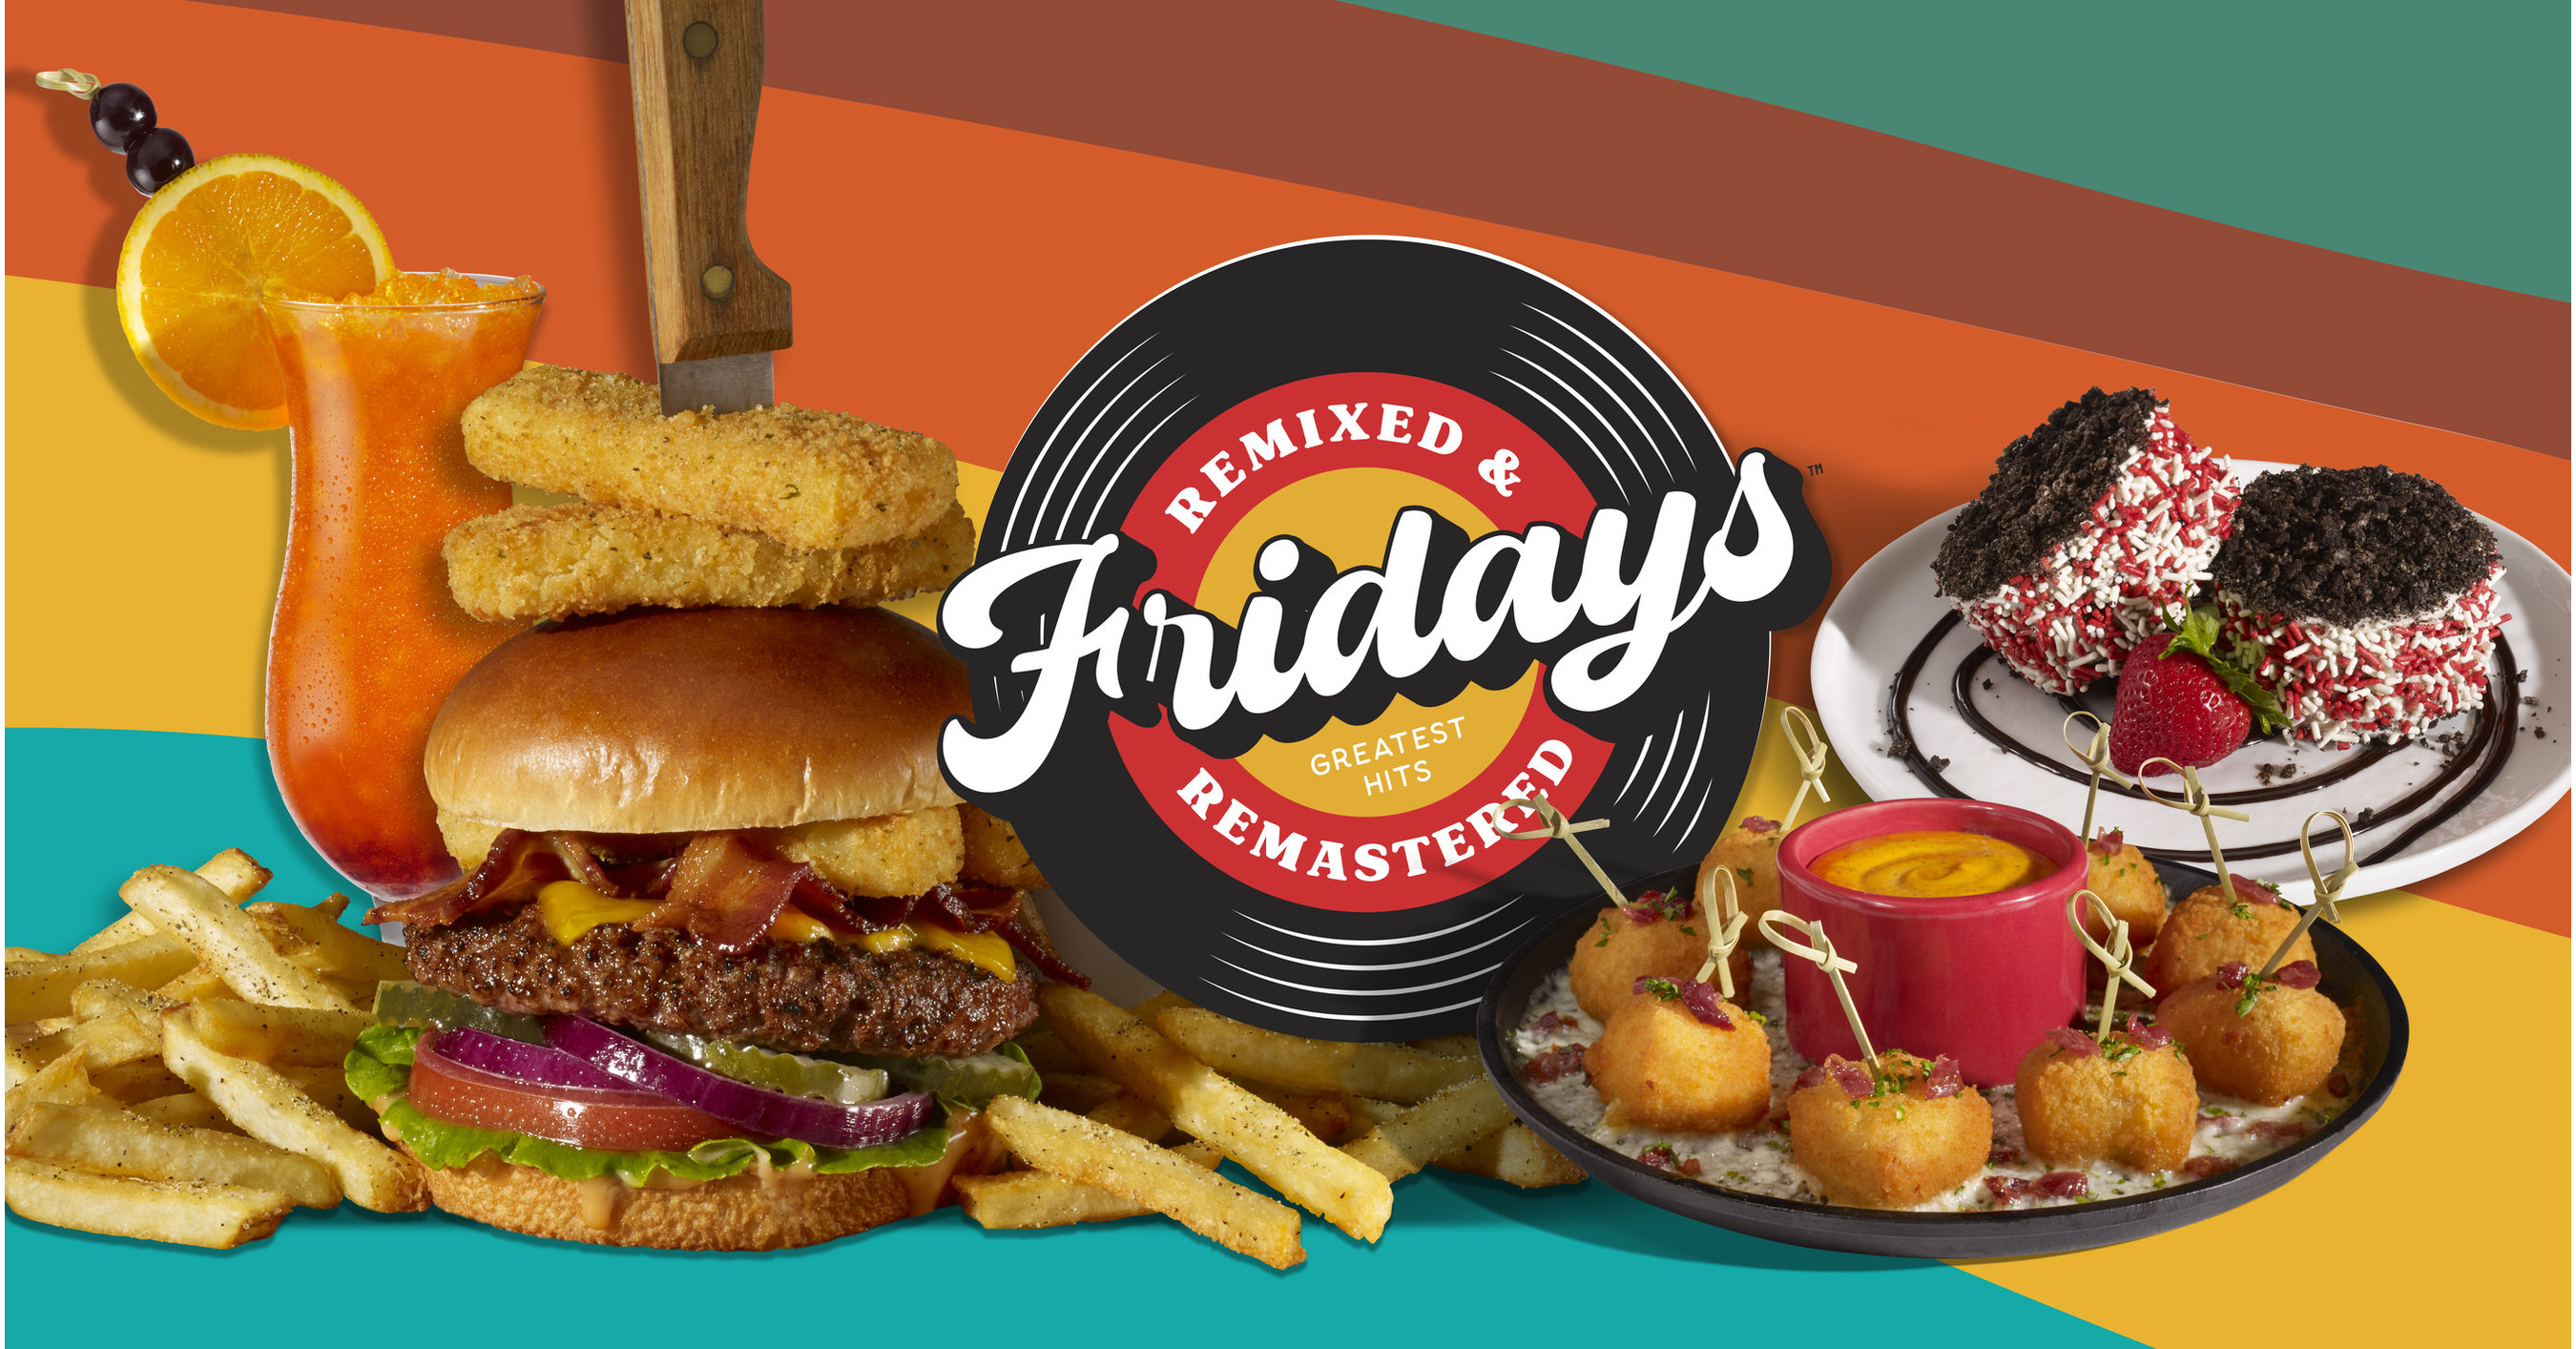 TGI Fridays Trinidad - The Ultimate party- Sangria Pitchers